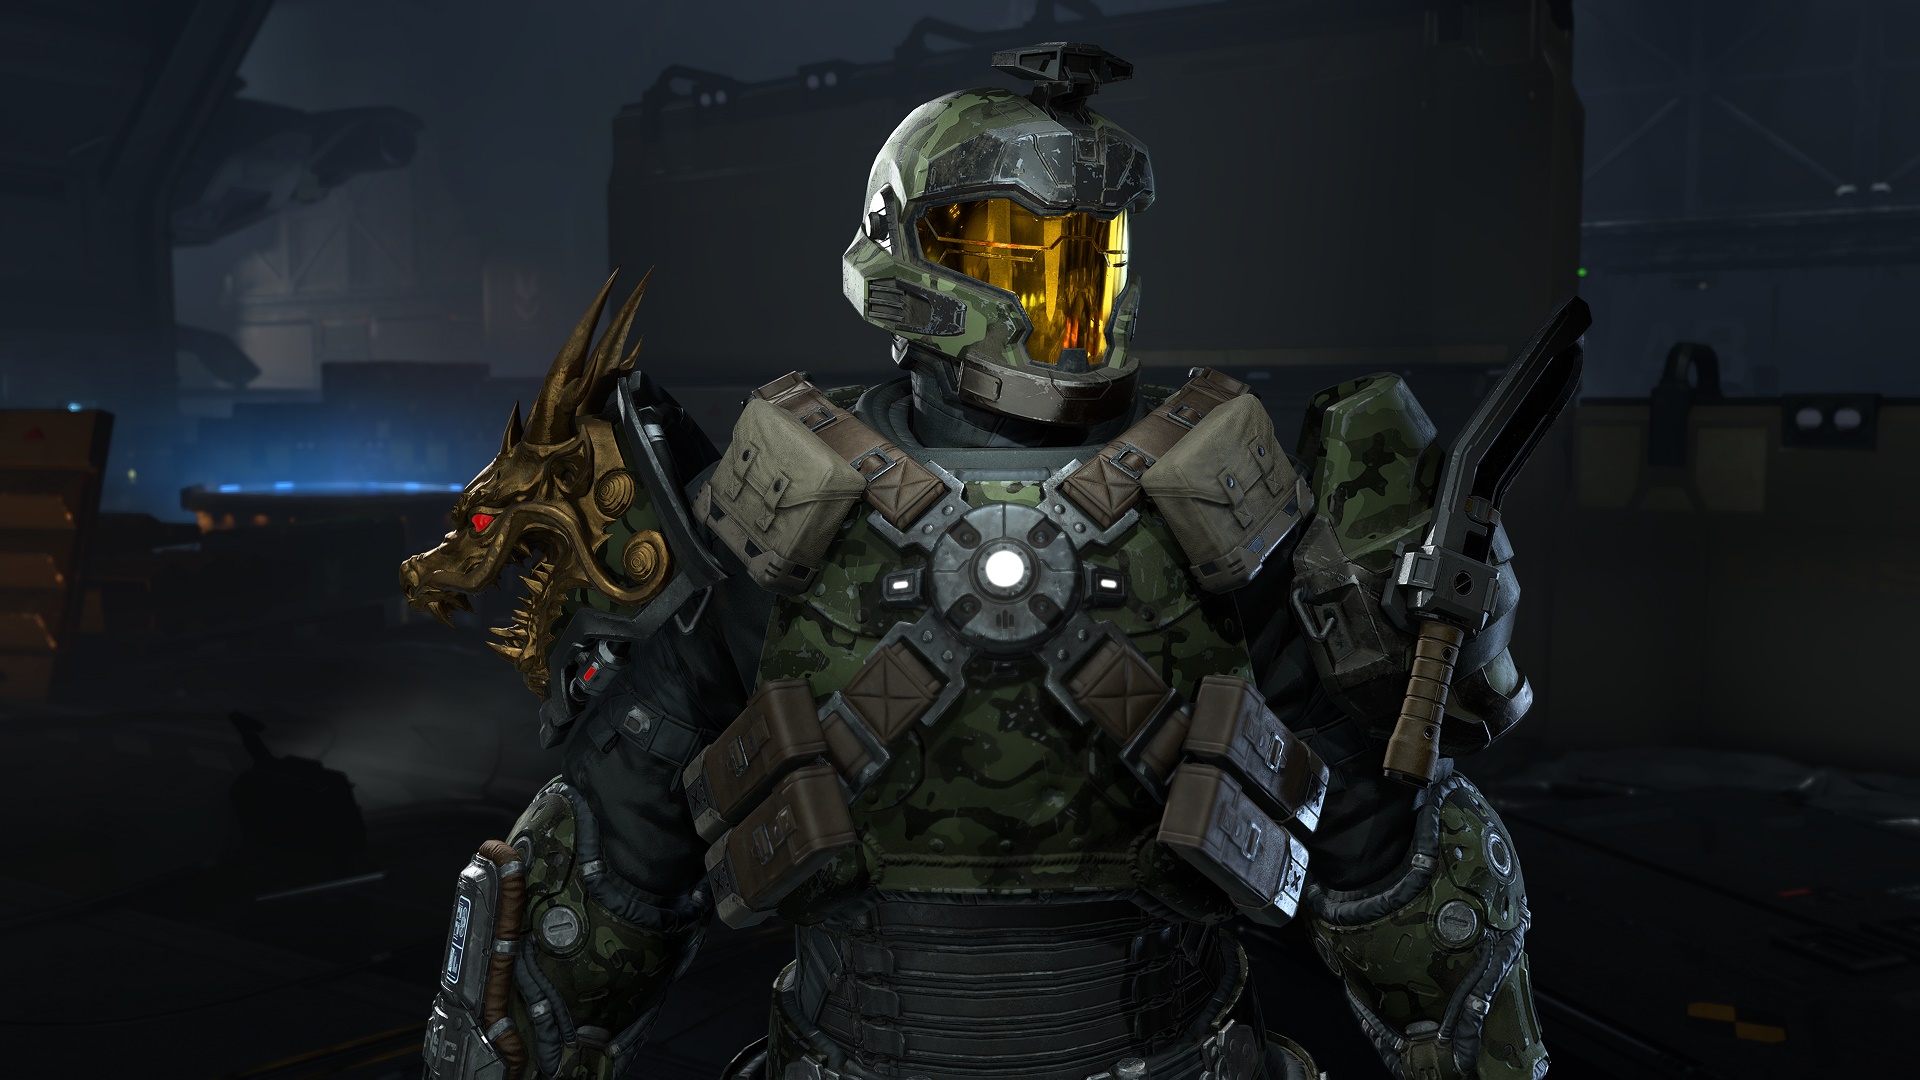 Halo Infinite screenshot of a Spartan with multi-use shoulder pads